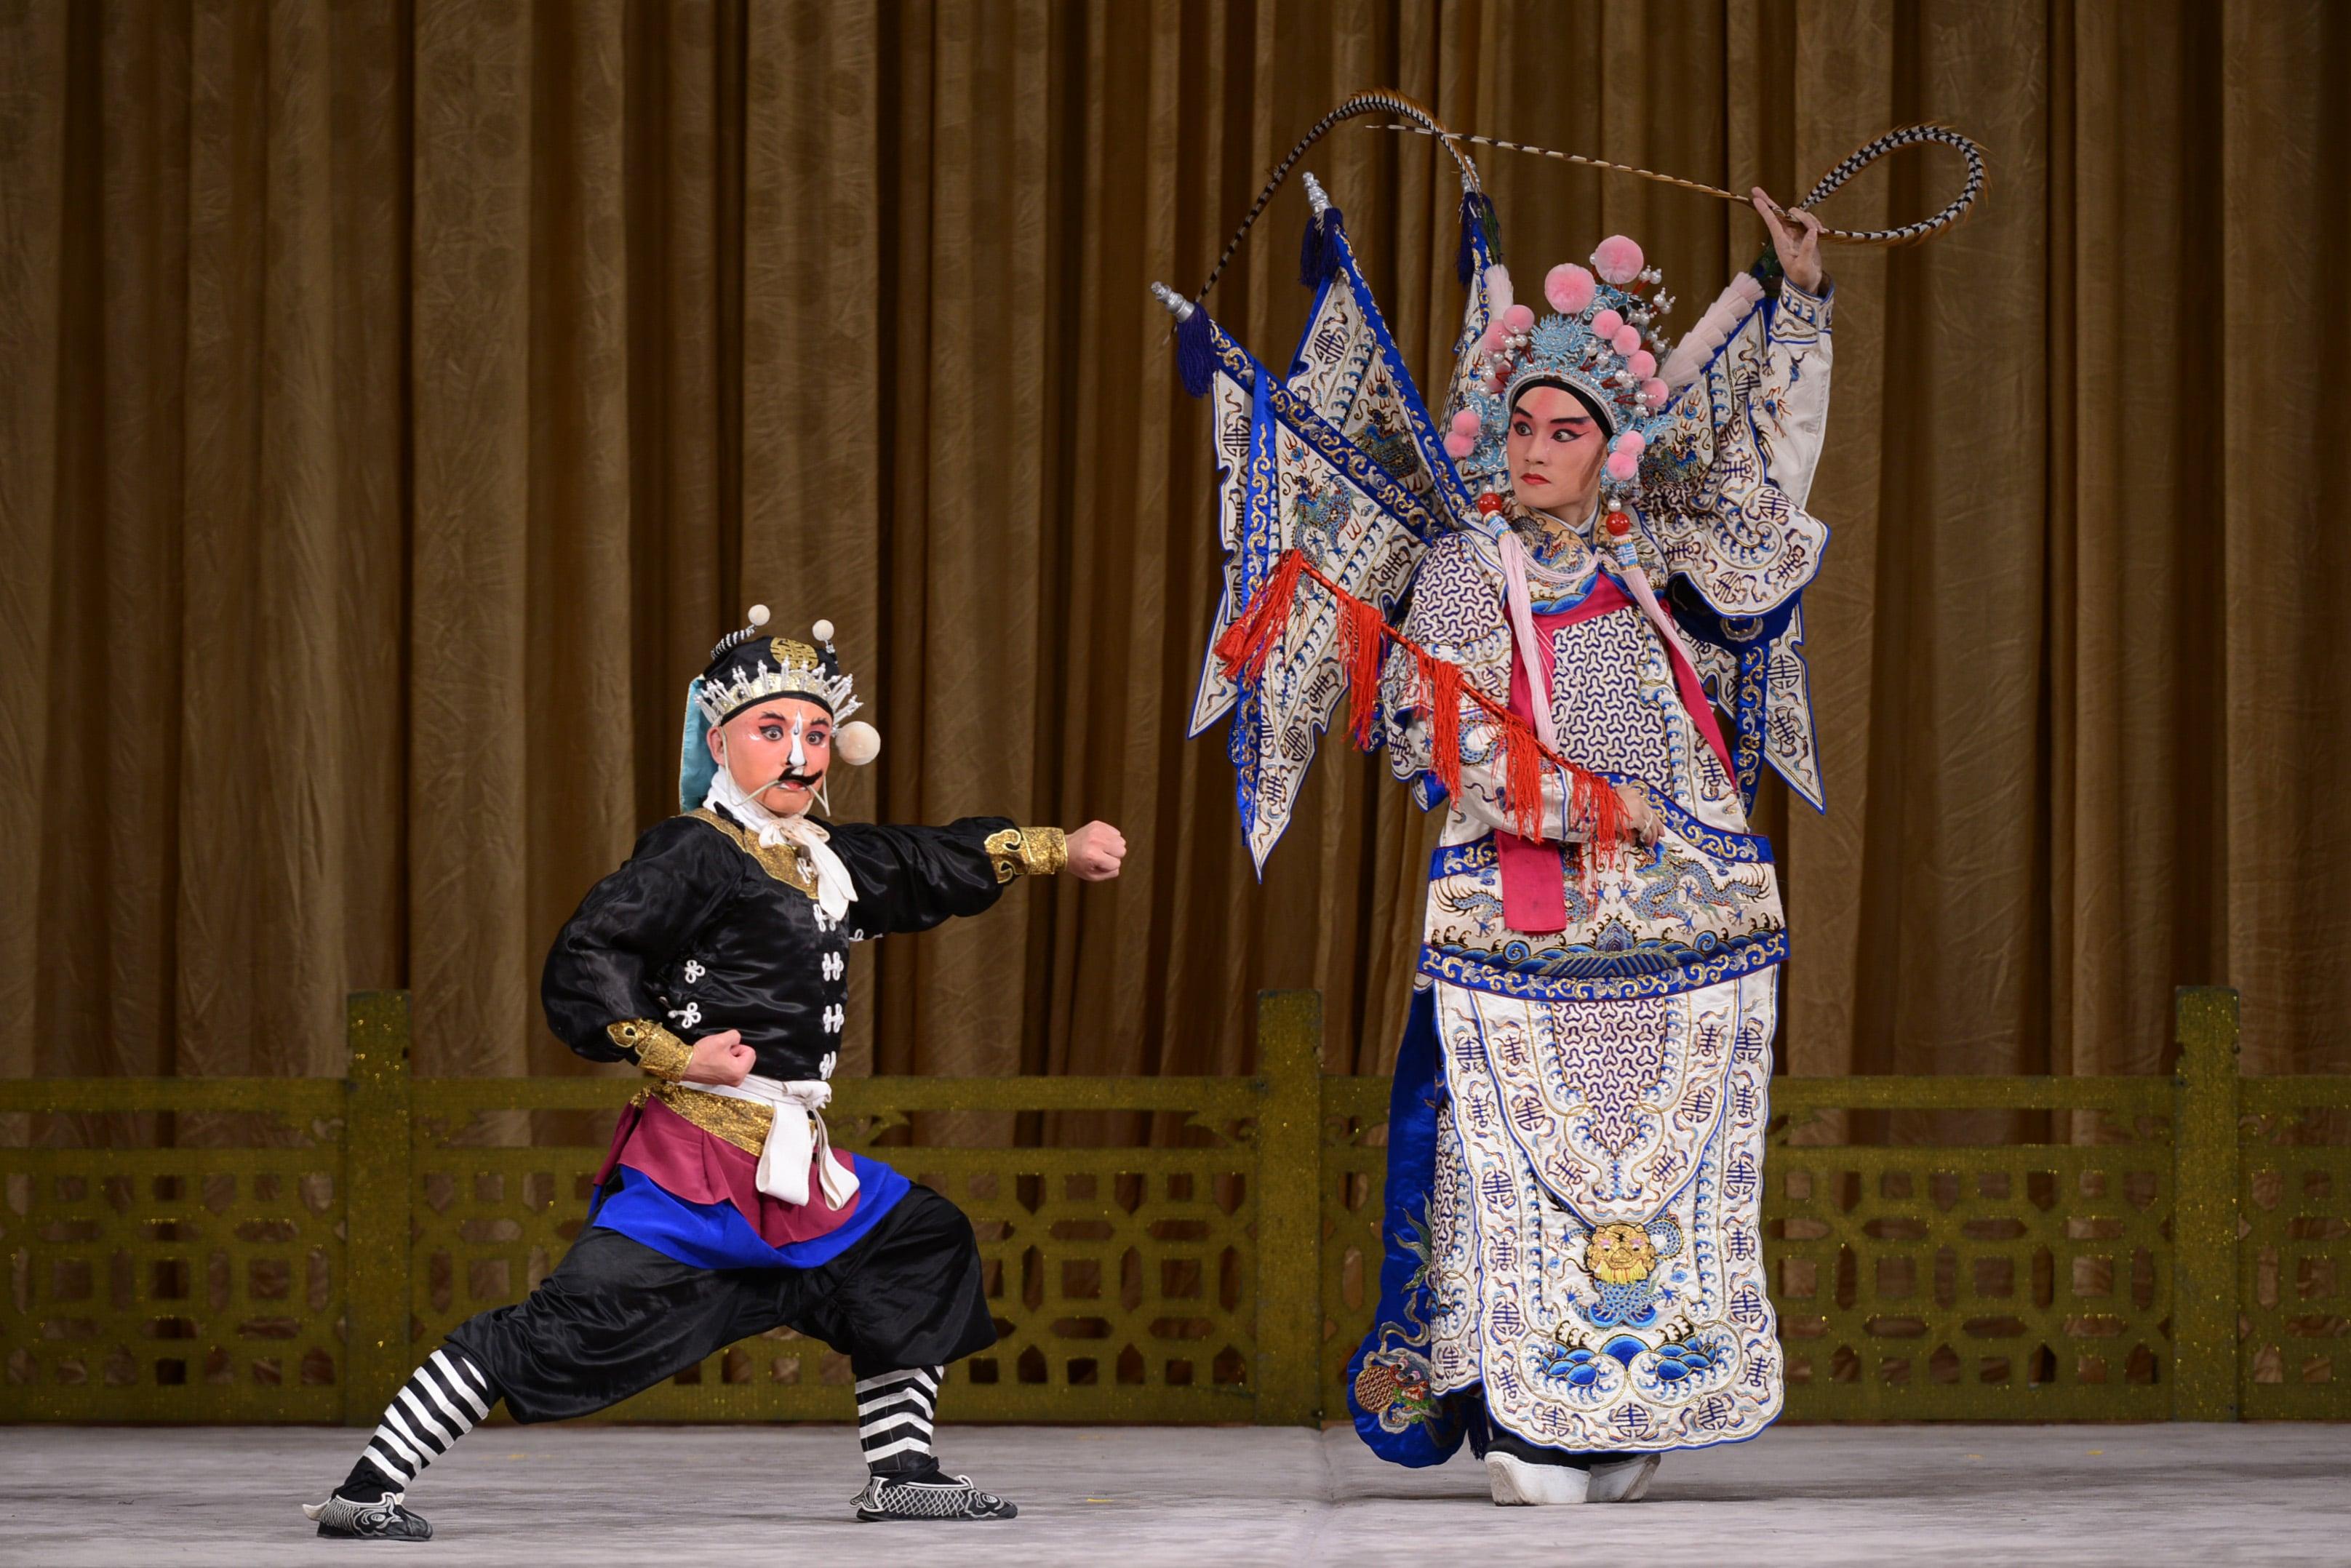 The inaugural Chinese Culture Festival will stage three classic Northern Kunqu opera plays in July. Photo shows a scene from the performance "Asking the Way" from "The Chain Scheme".